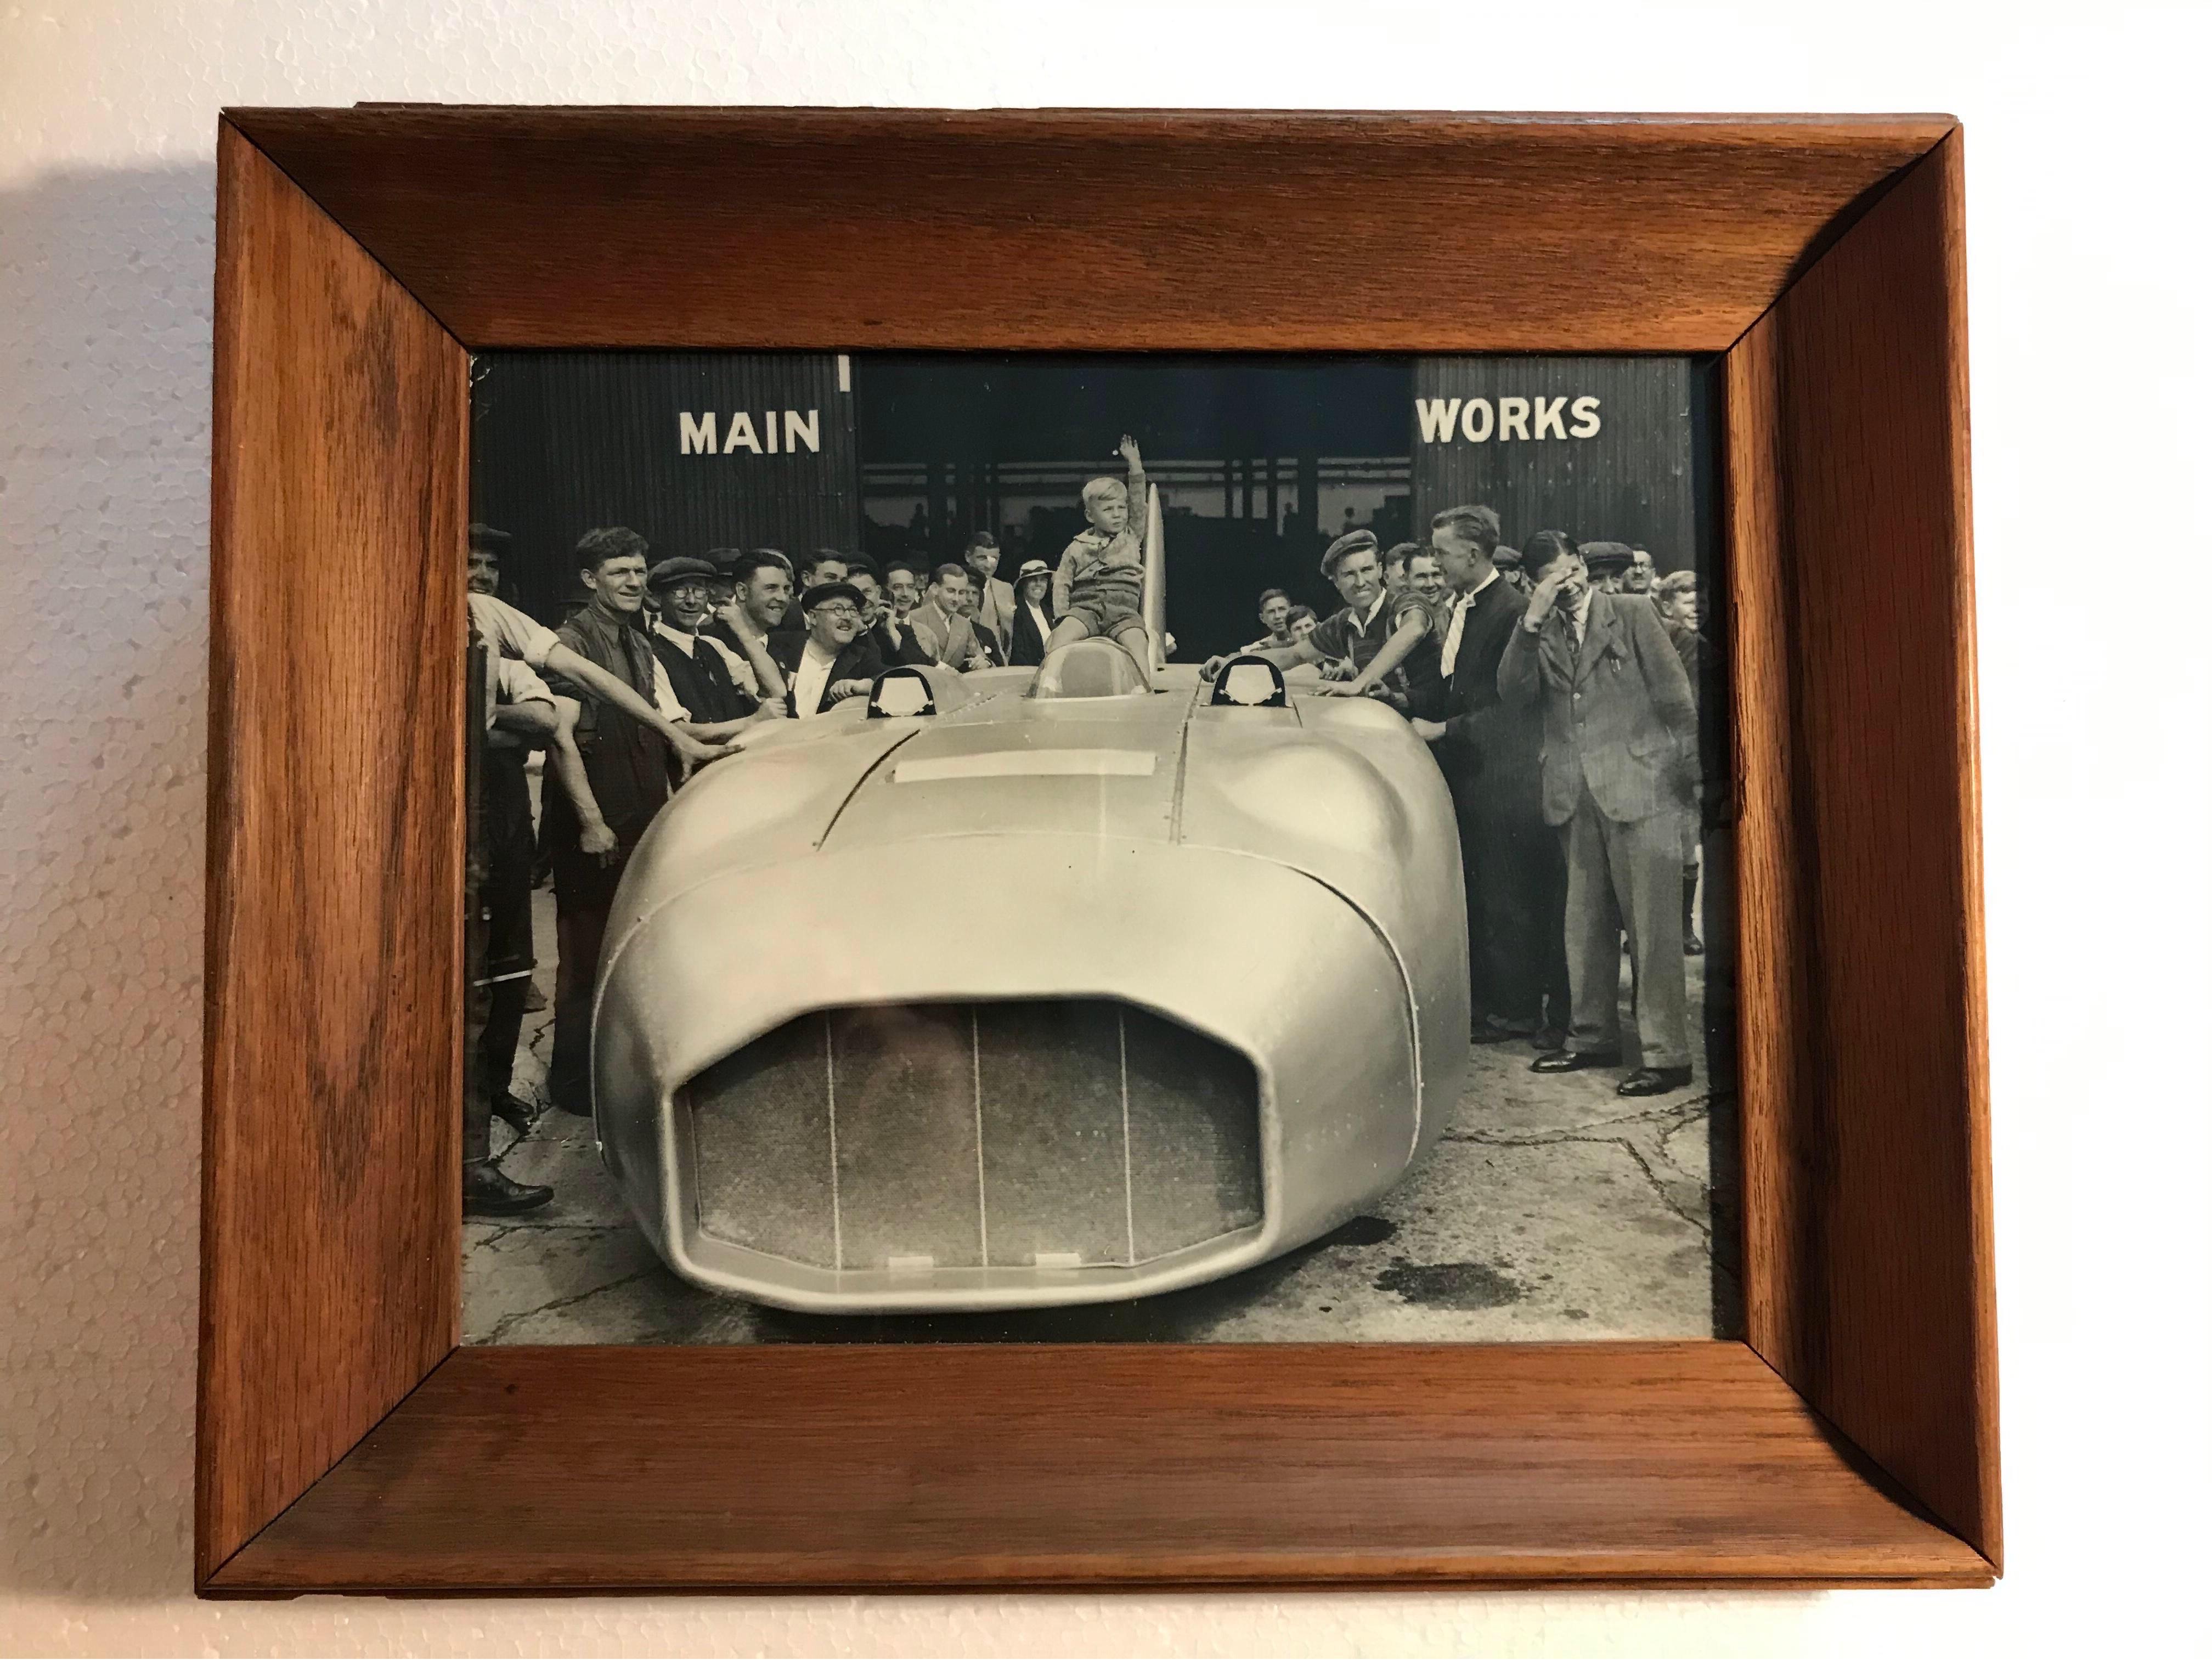 Original vintage B&W press photo from 1937 of the world land speed rekord car Thunderbolt with 5000 bhp and 312 mph.
Driven by Captain George Edward Thomas Eyston MC OBE (28 June 1897 – 11 June 1979)
Mounted in a vintage solid oak frame.